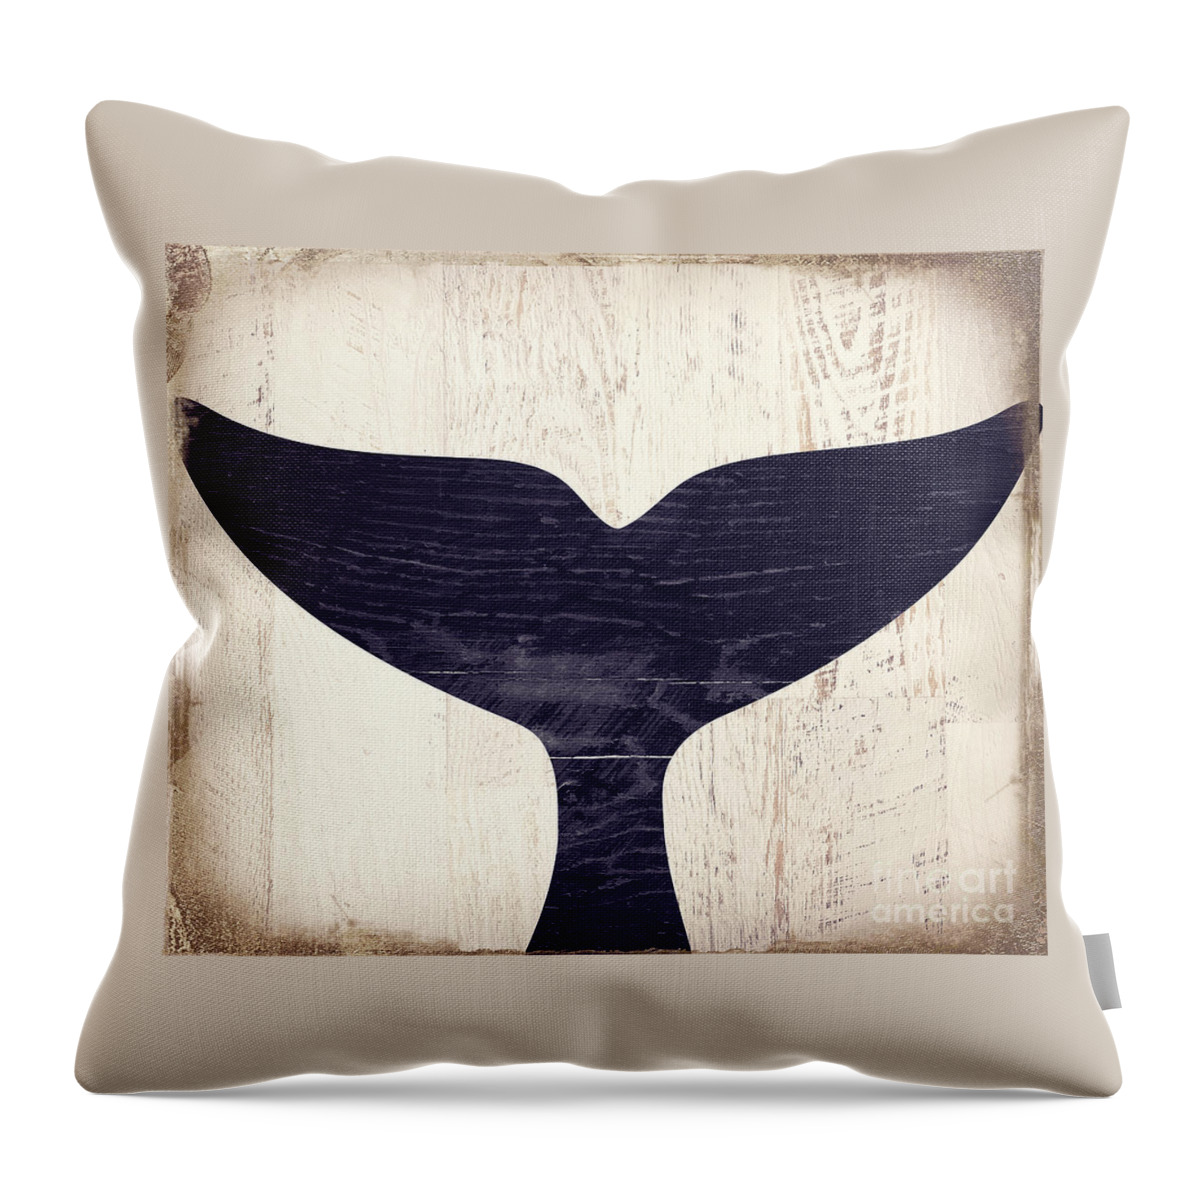 Humpback Throw Pillow featuring the painting Humpback I by Mindy Sommers